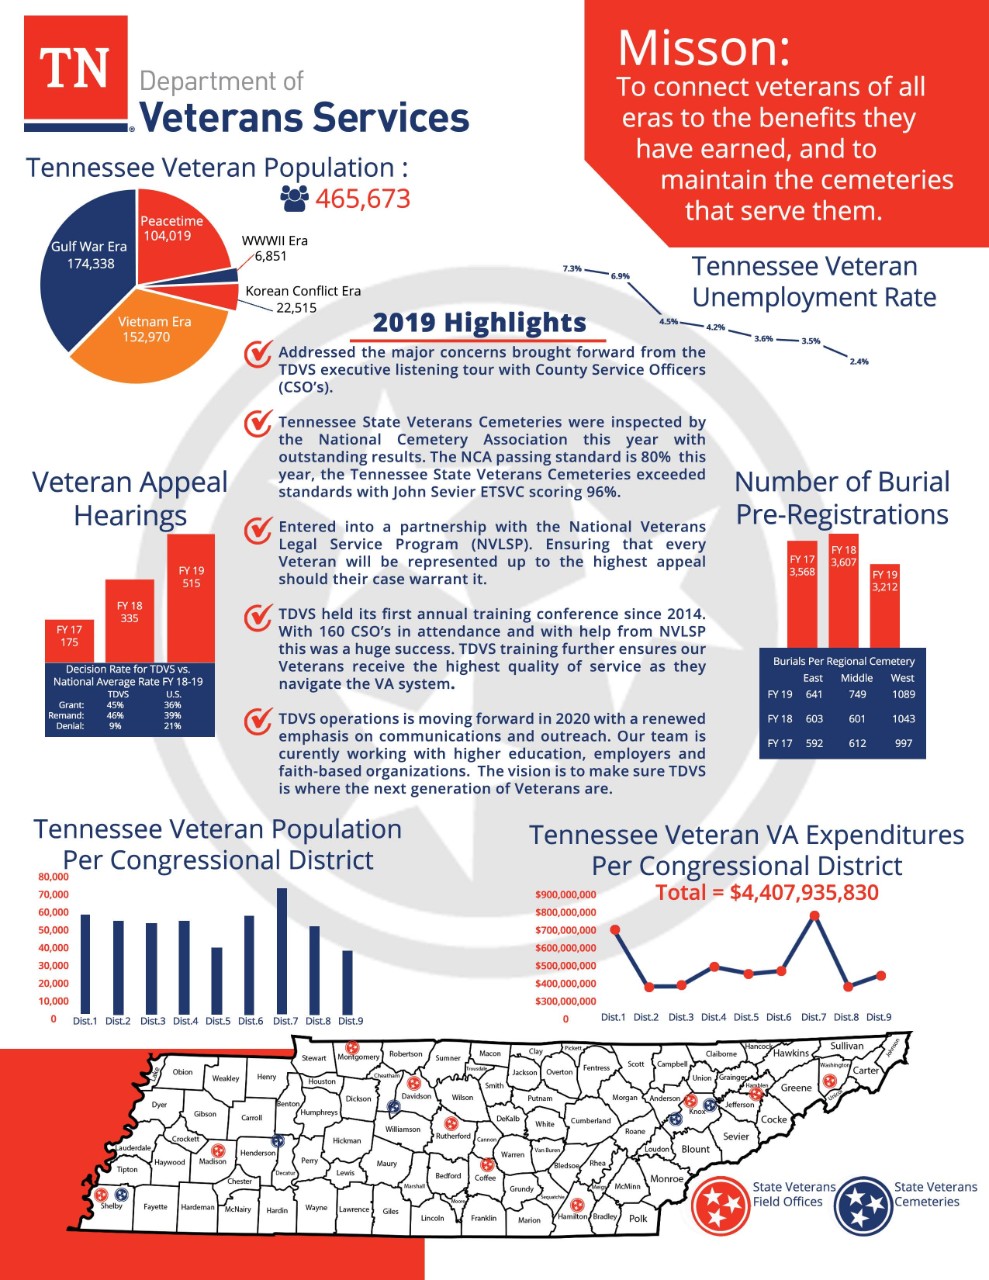 Department of Veterans Services_2020 One-Pager_Page_1